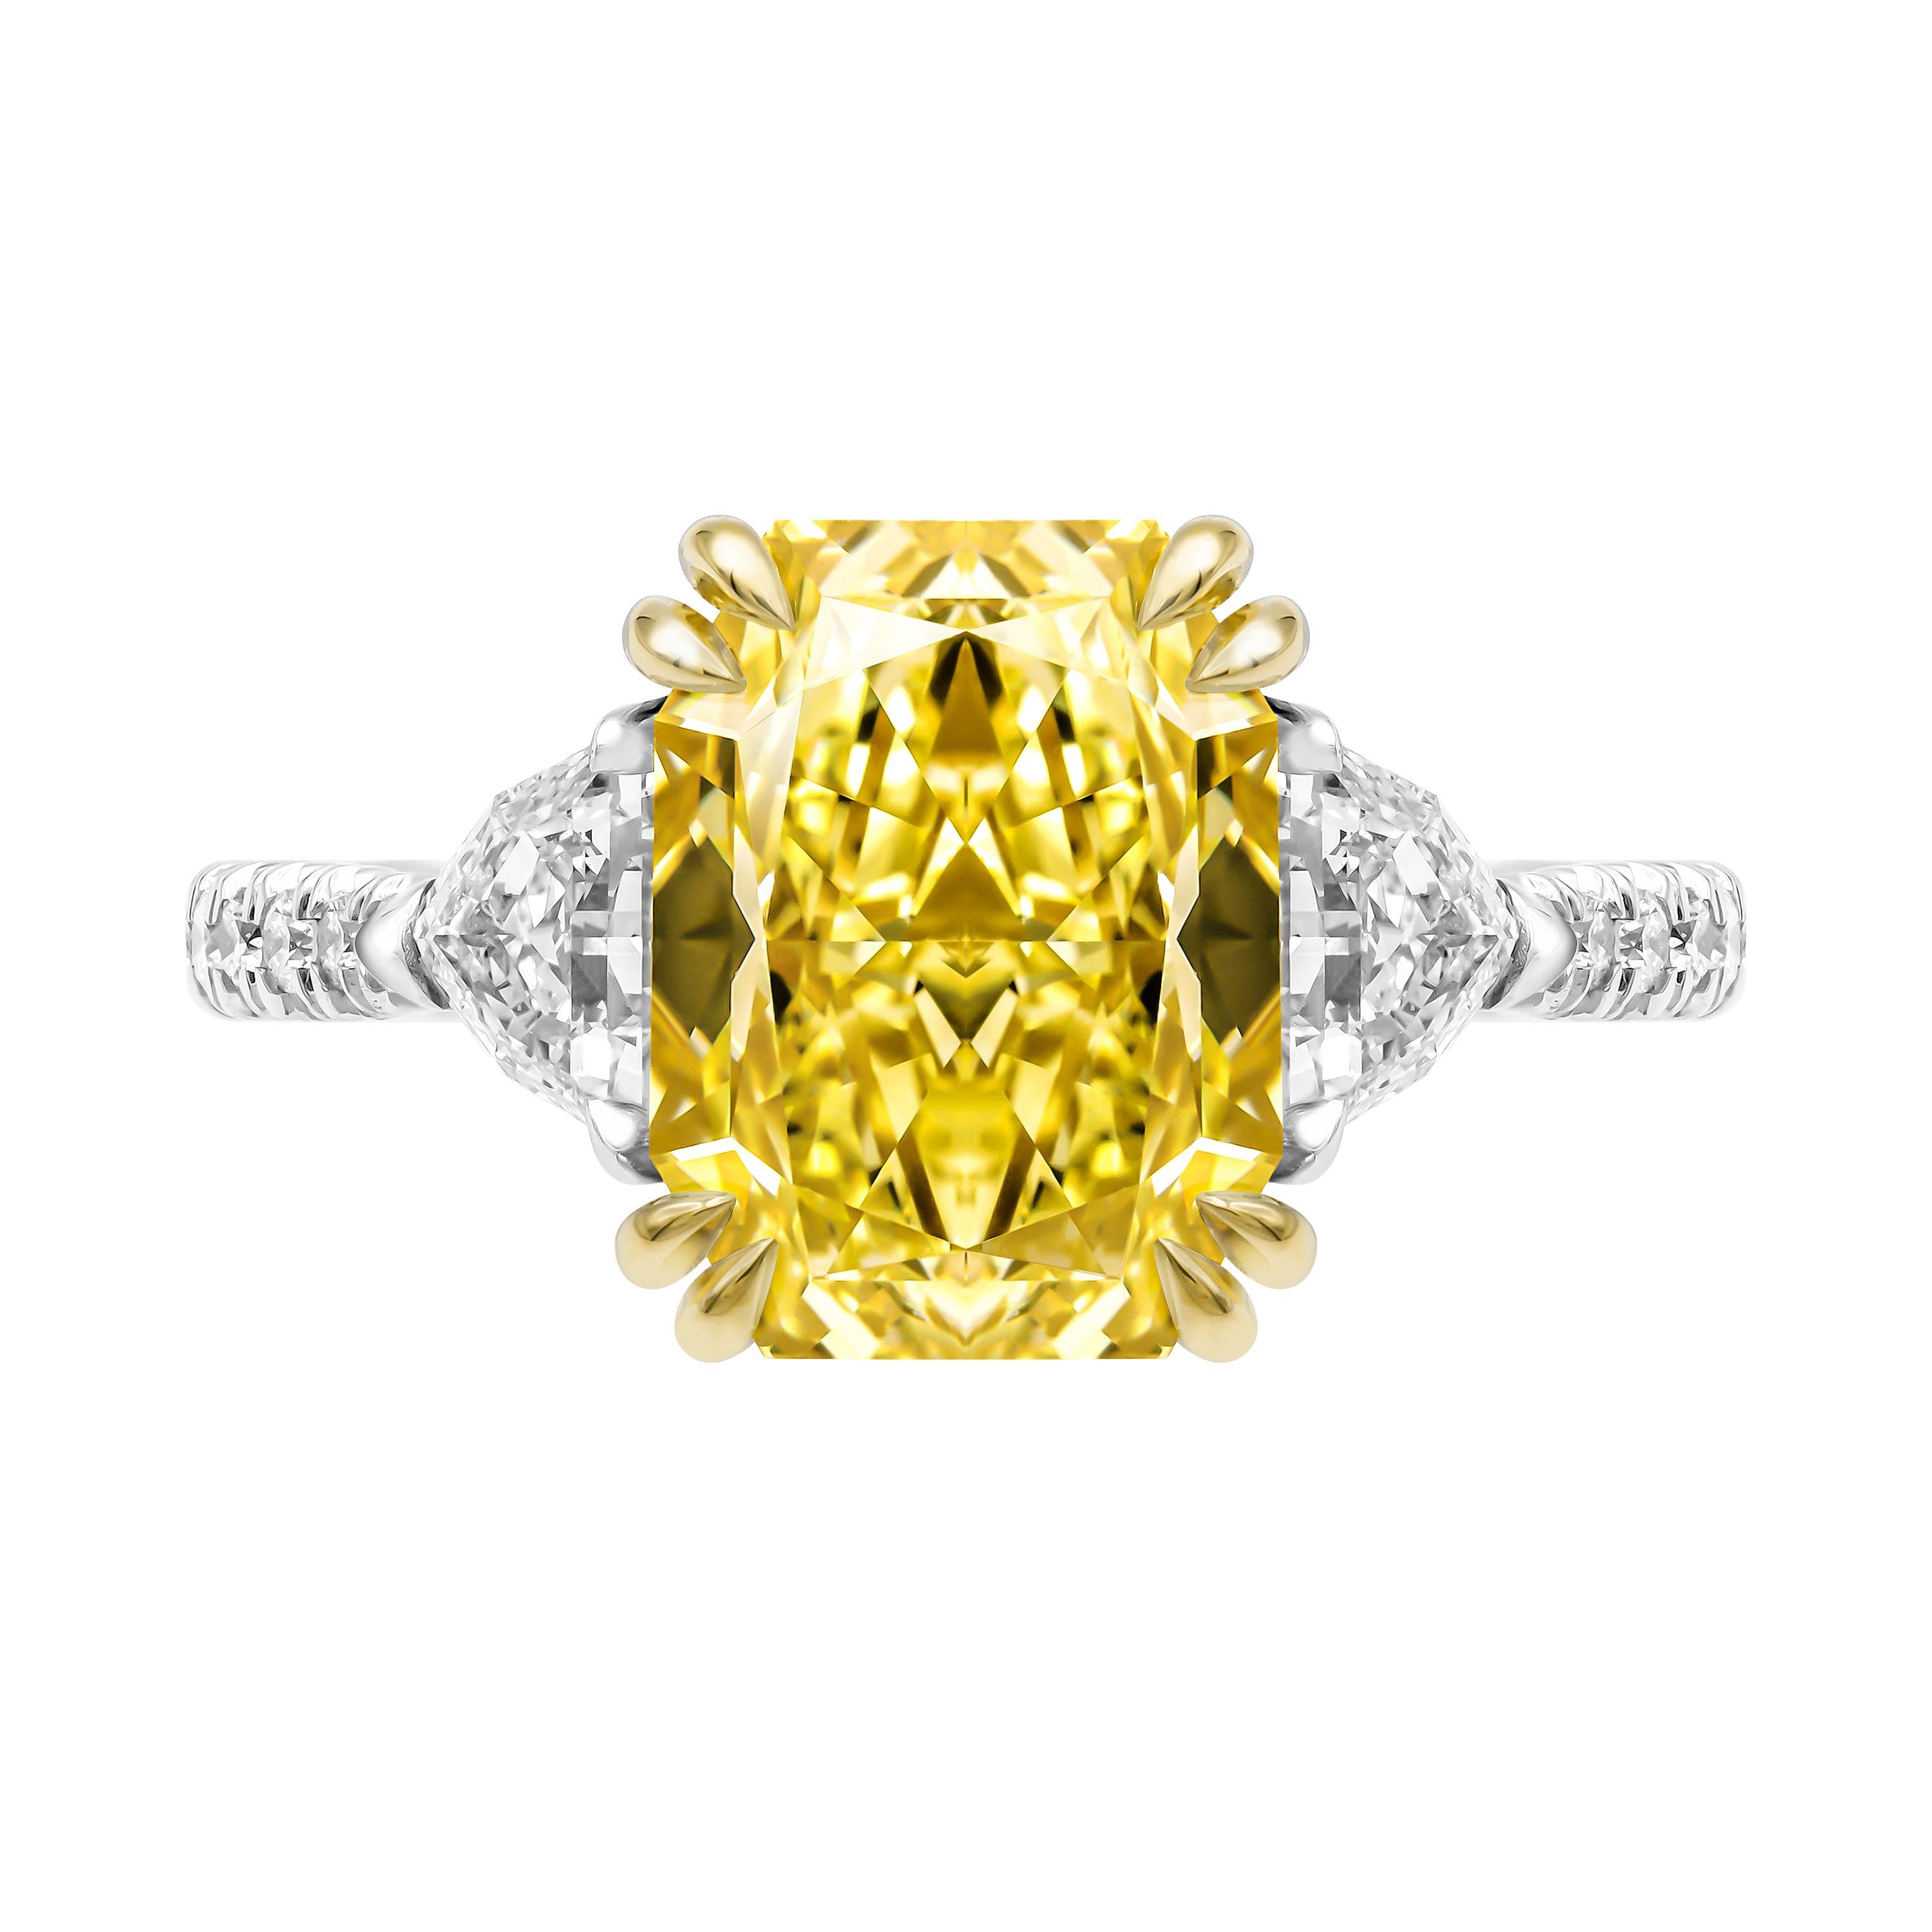 Extremely rare and one of a kind, a fancy color diamond is truly the most luxurious and exotic stone in diamond family. 
Very Vivid and Vibrant Huge 3.50ct Diamond is Natural Fancy Yellow Color, VVS2 clarity . 
Center measurements: 10.14 x 7.72 x